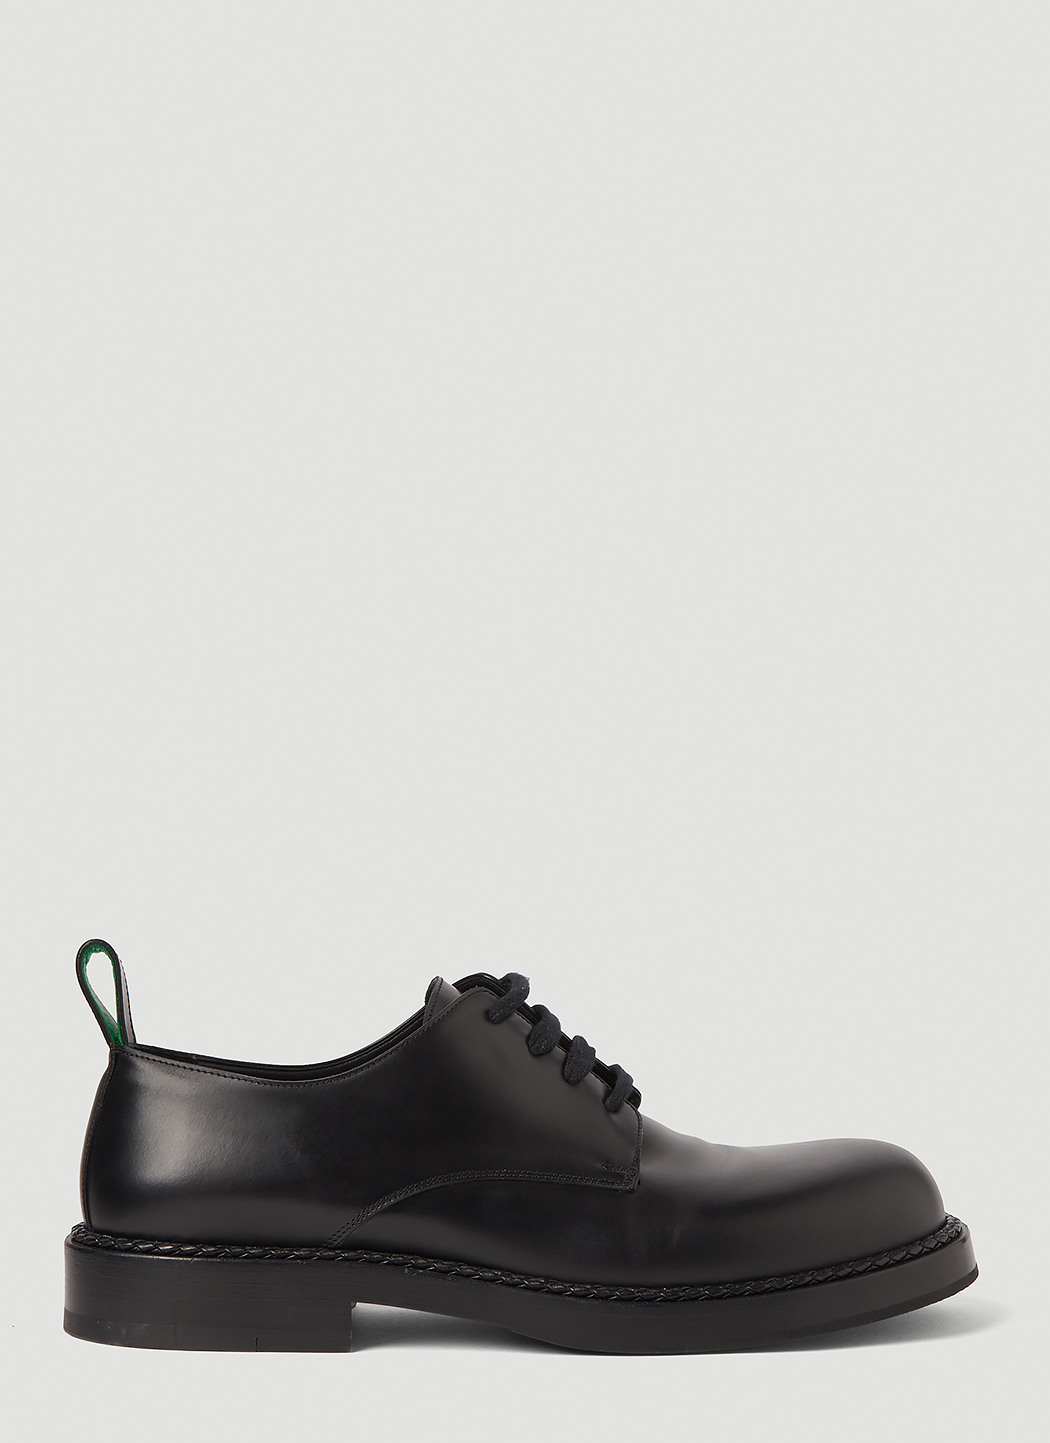 Wardrobe Lace-Up Shoes